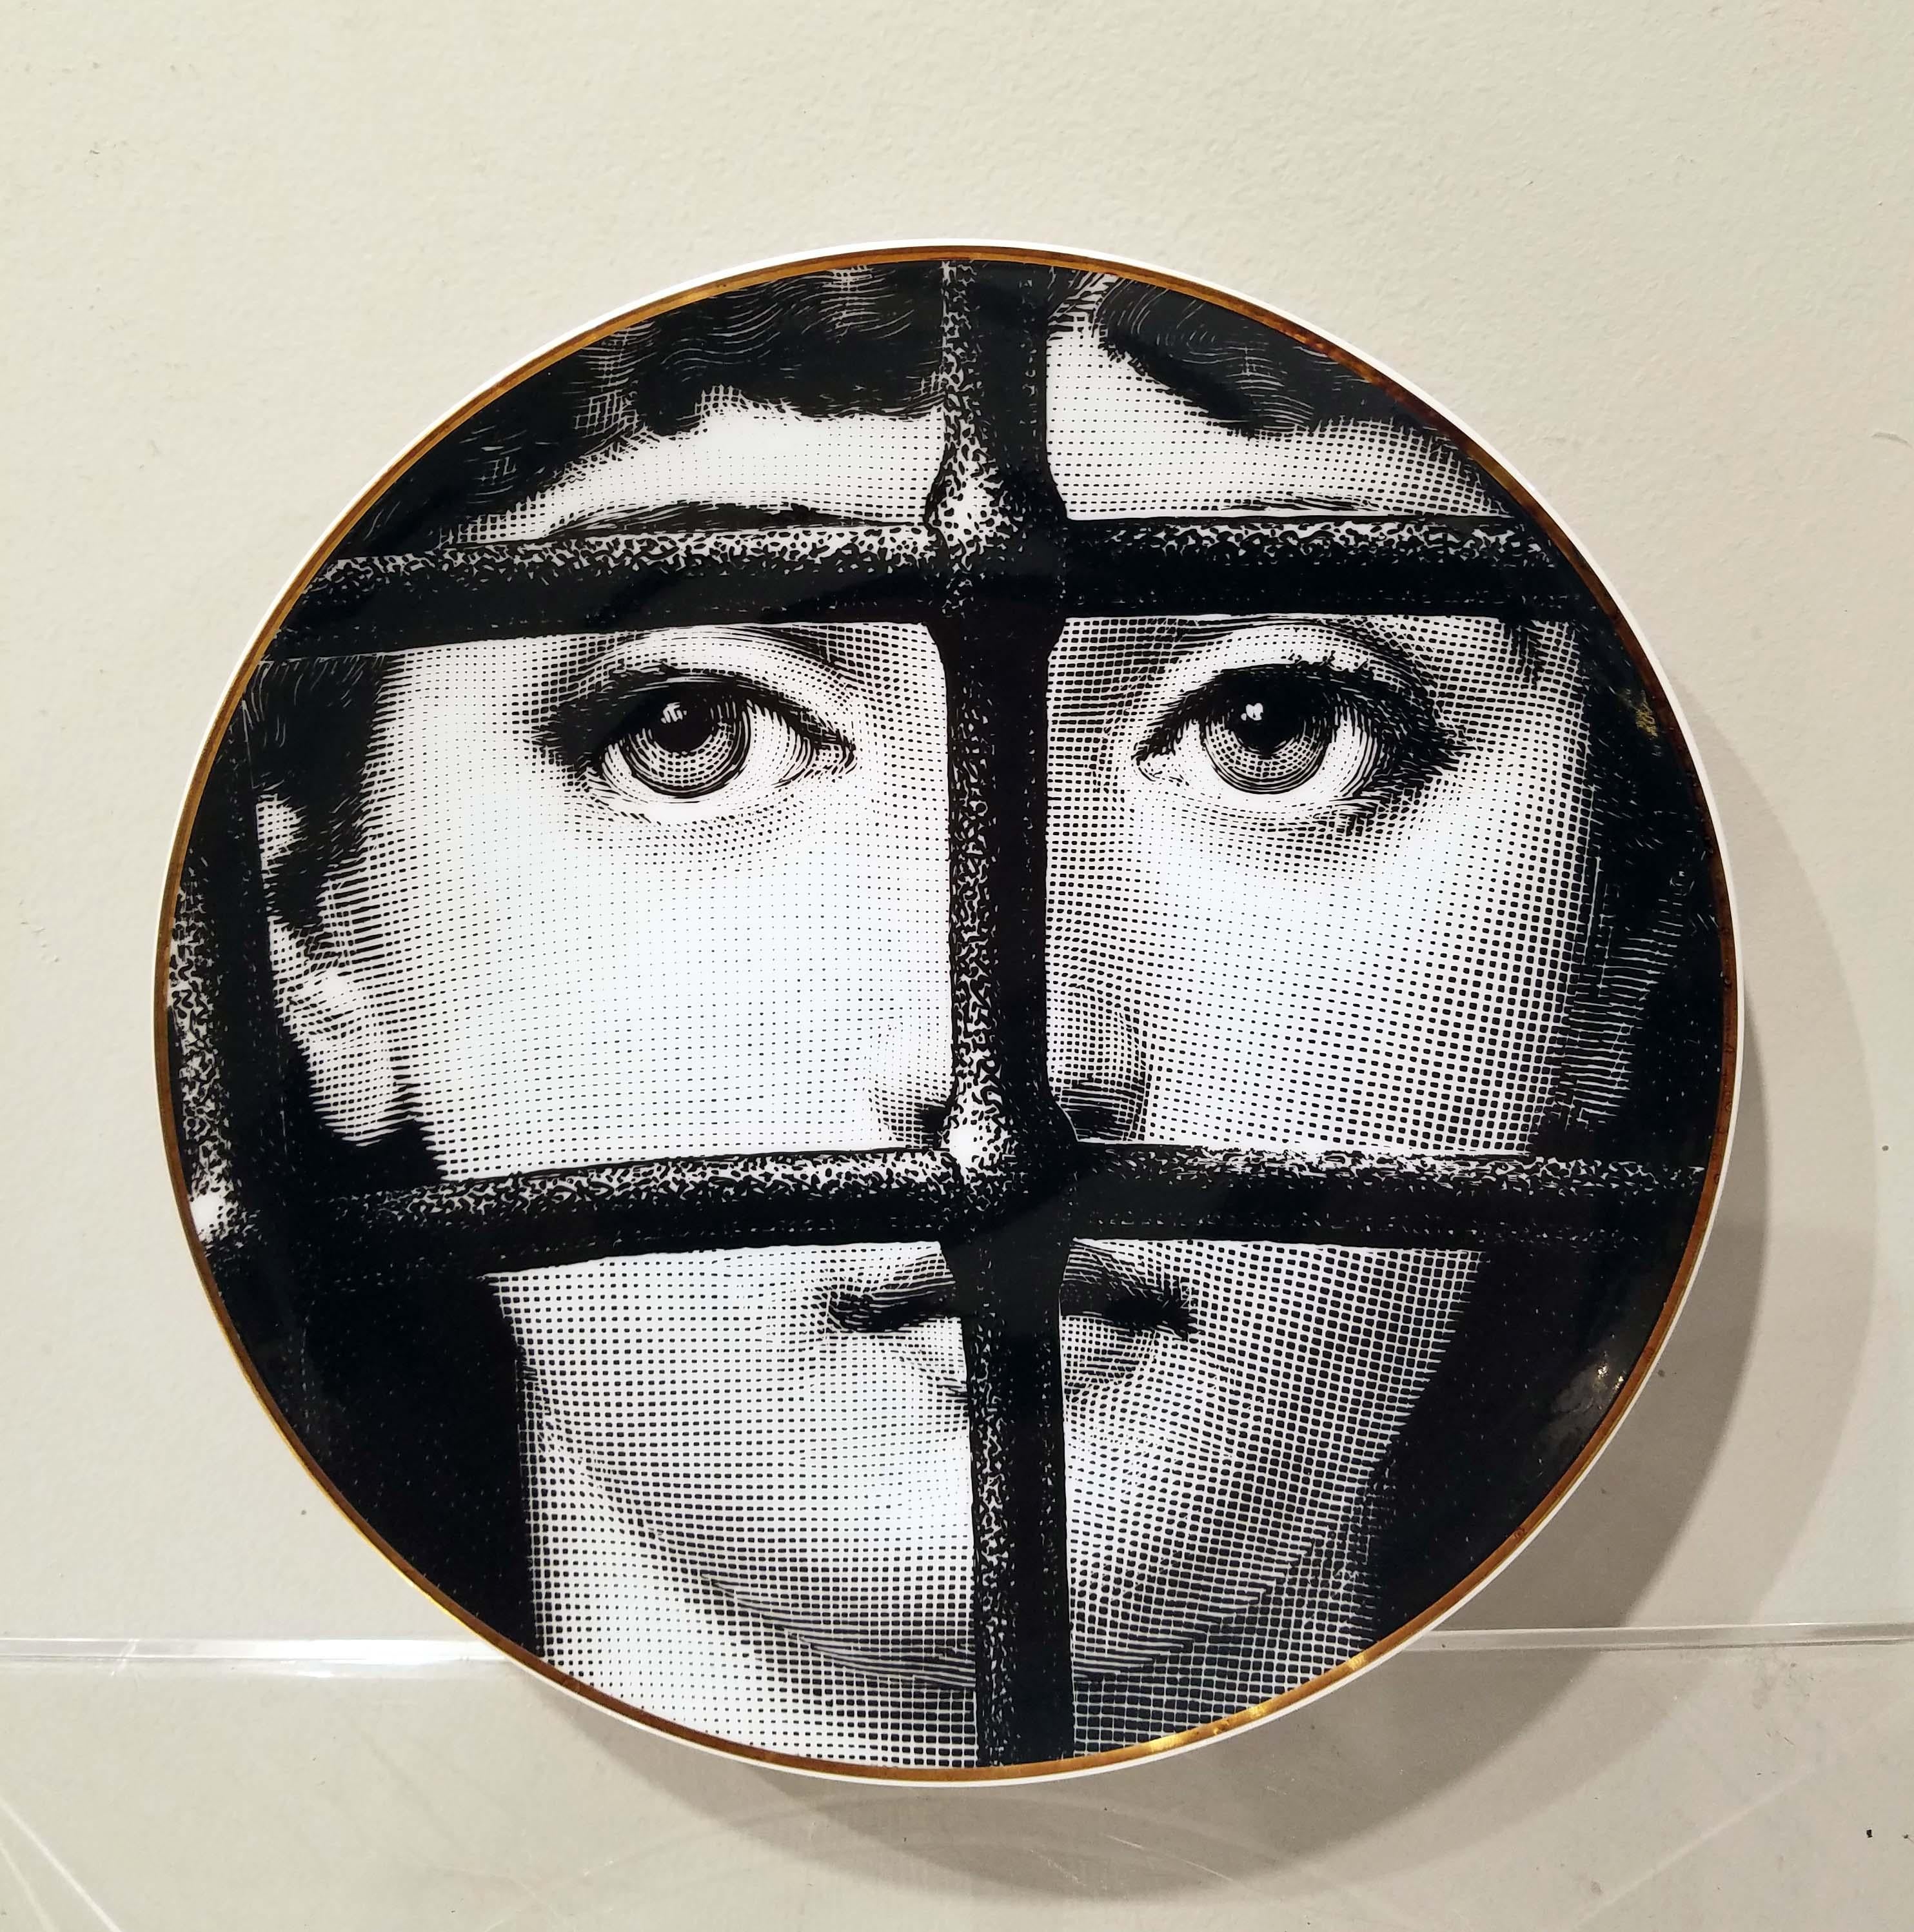 A large set of six displaying porcelain plates with surrealism designs by Piero Fornasetti for Rosenthal, an iconic series from 'Temi e variazioni' (“Themes and Variations”). Each with the original box included, circa 1980. These plates were made